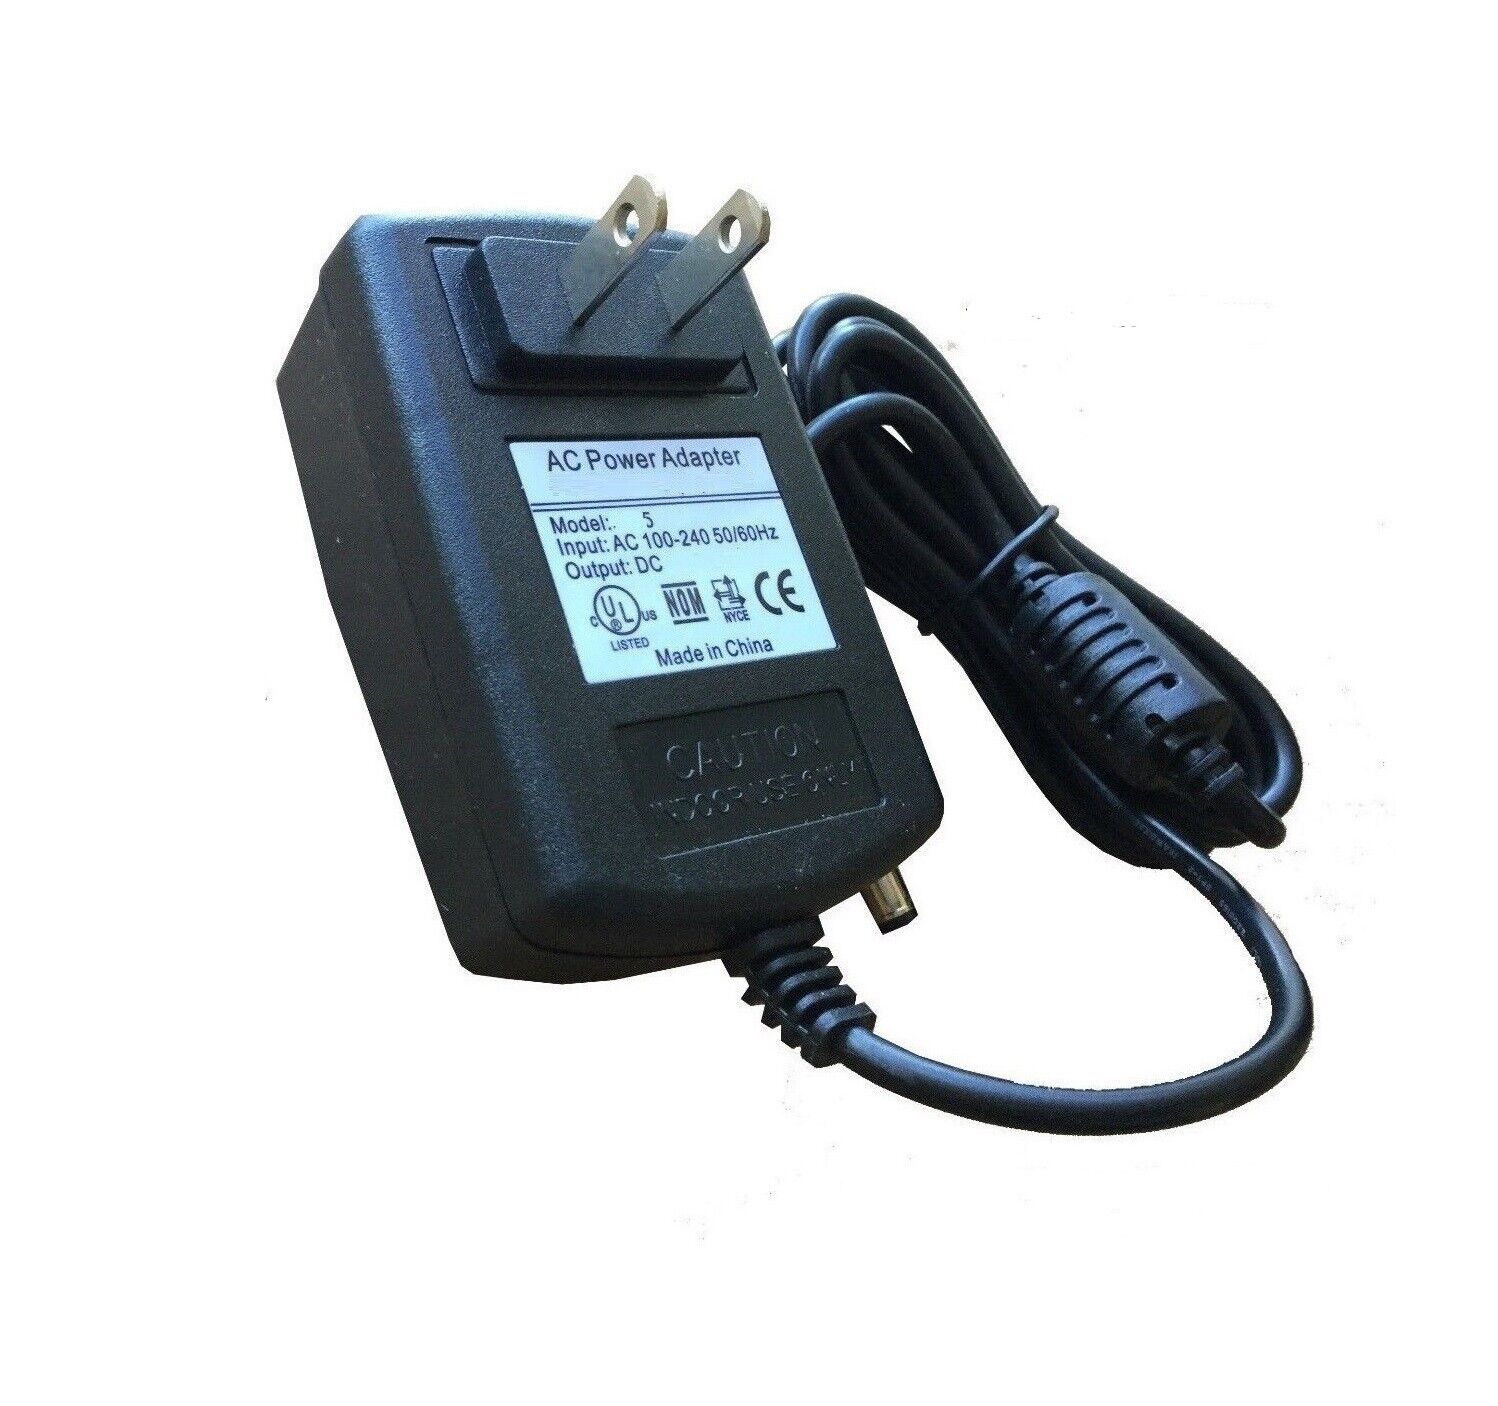 AC Adapter - Power Supply for Studiologic SL88 Grand Keyboard Controller Country/Region of Manufacture China Type AC/DC